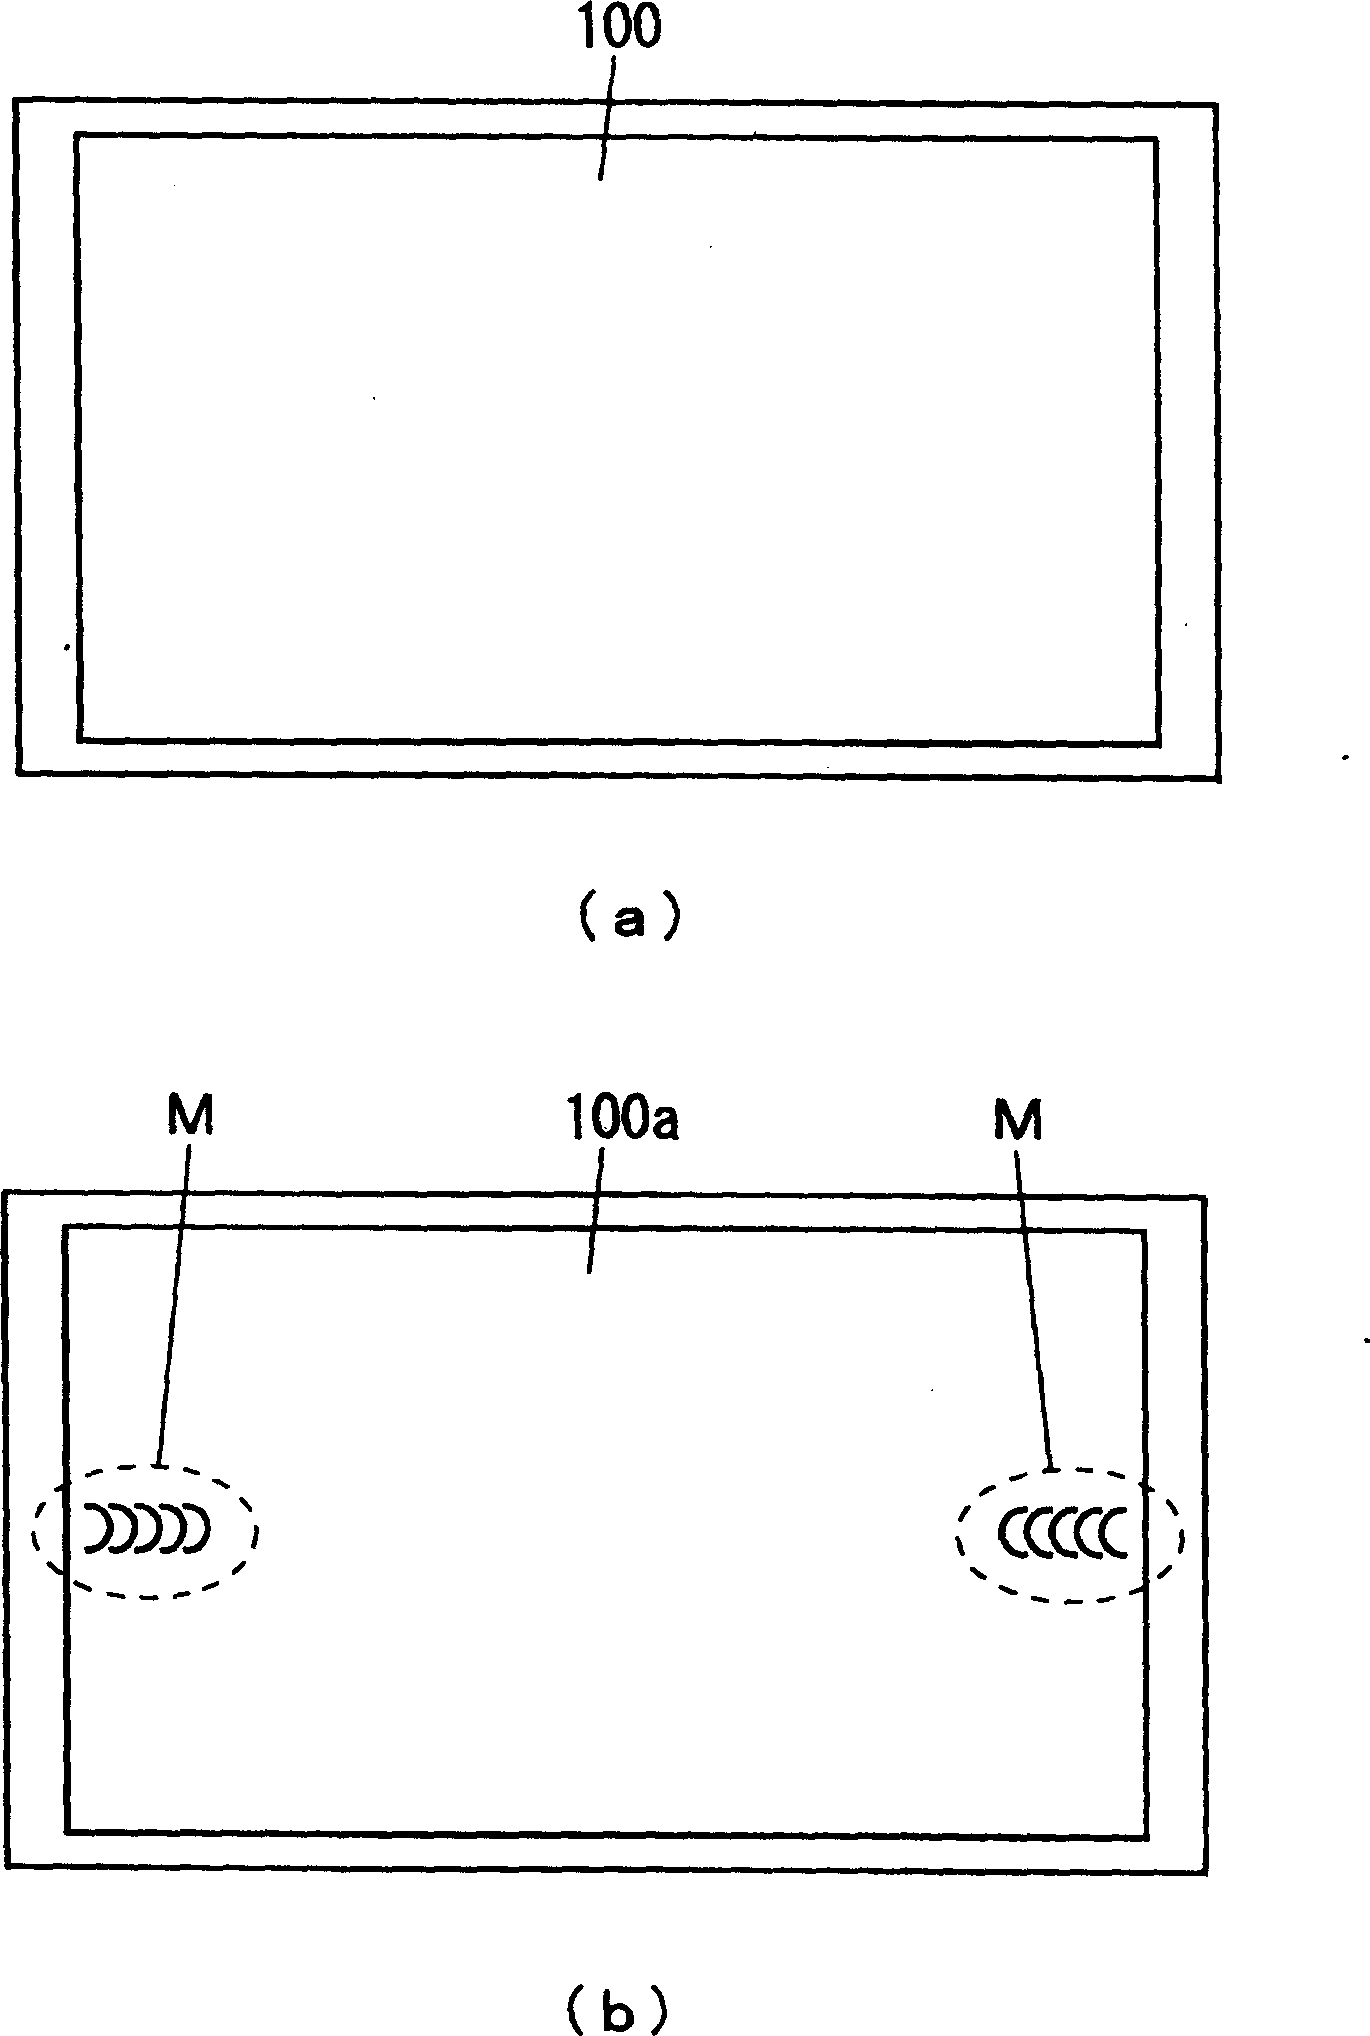 Transmissive screen and rear projector